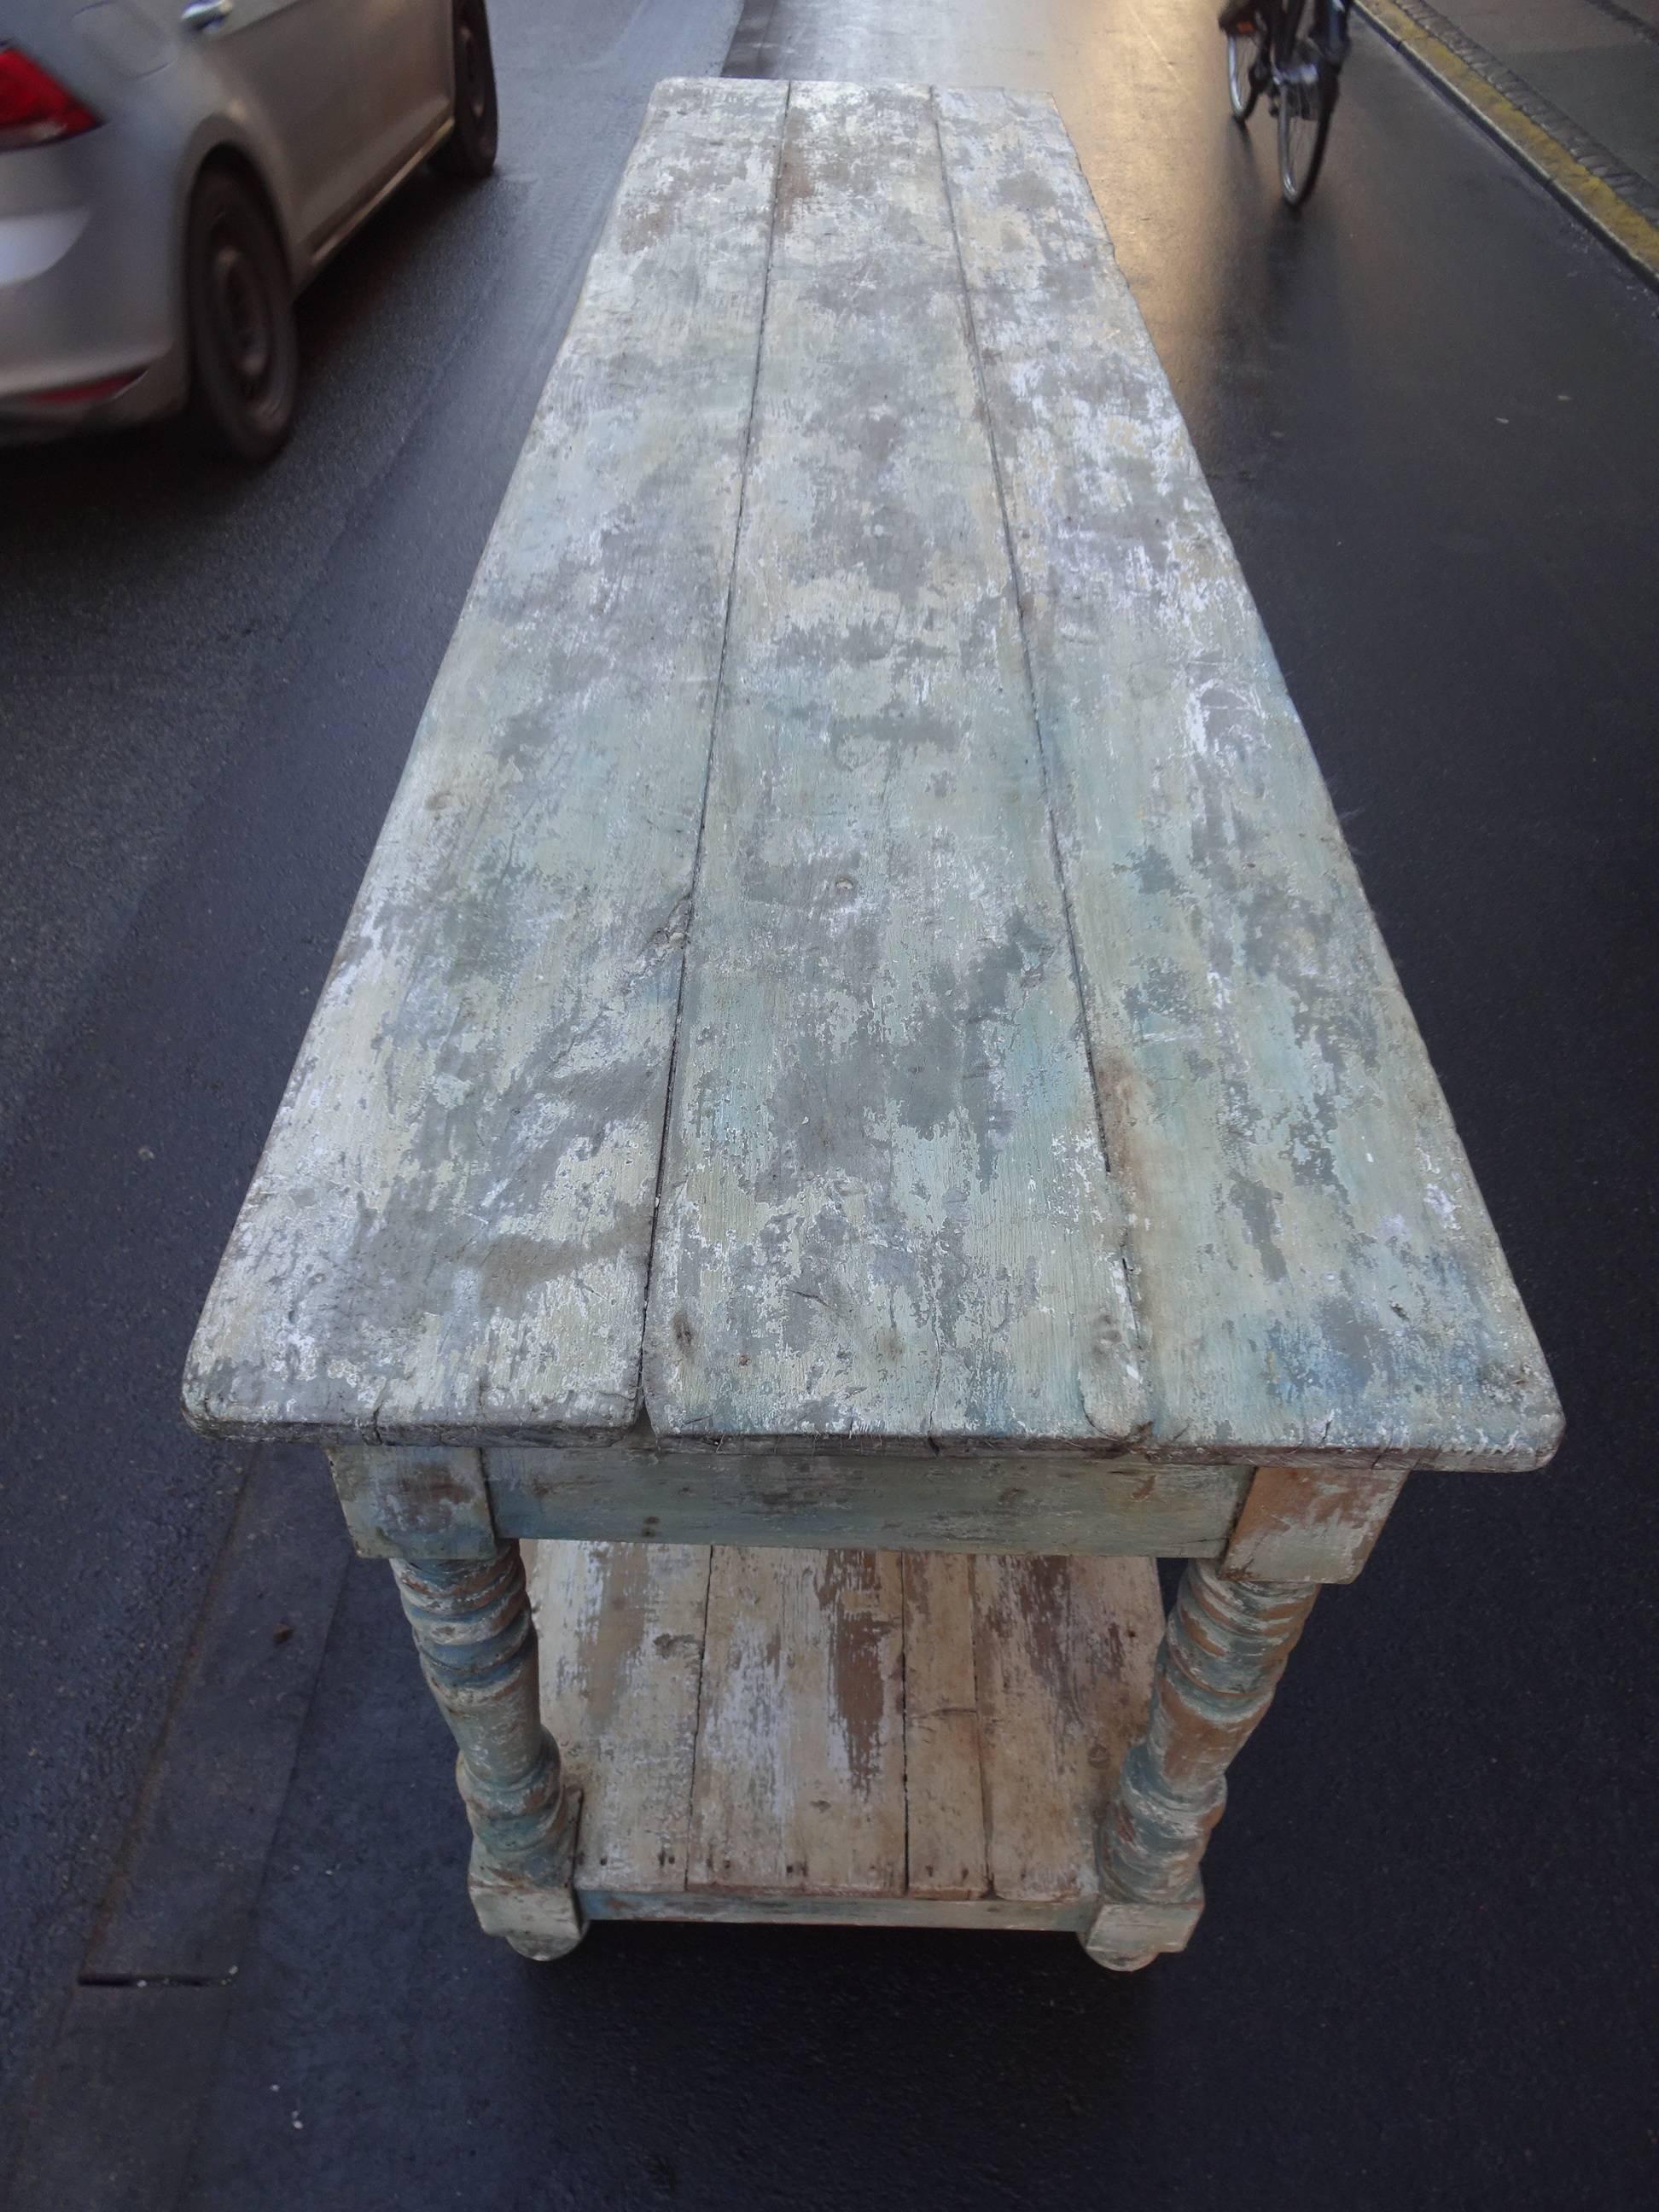 Wonderful vintage French console or drapier table with elongated lower shelf. Gorgeous patina with remains of the former colors the table has had through the times.